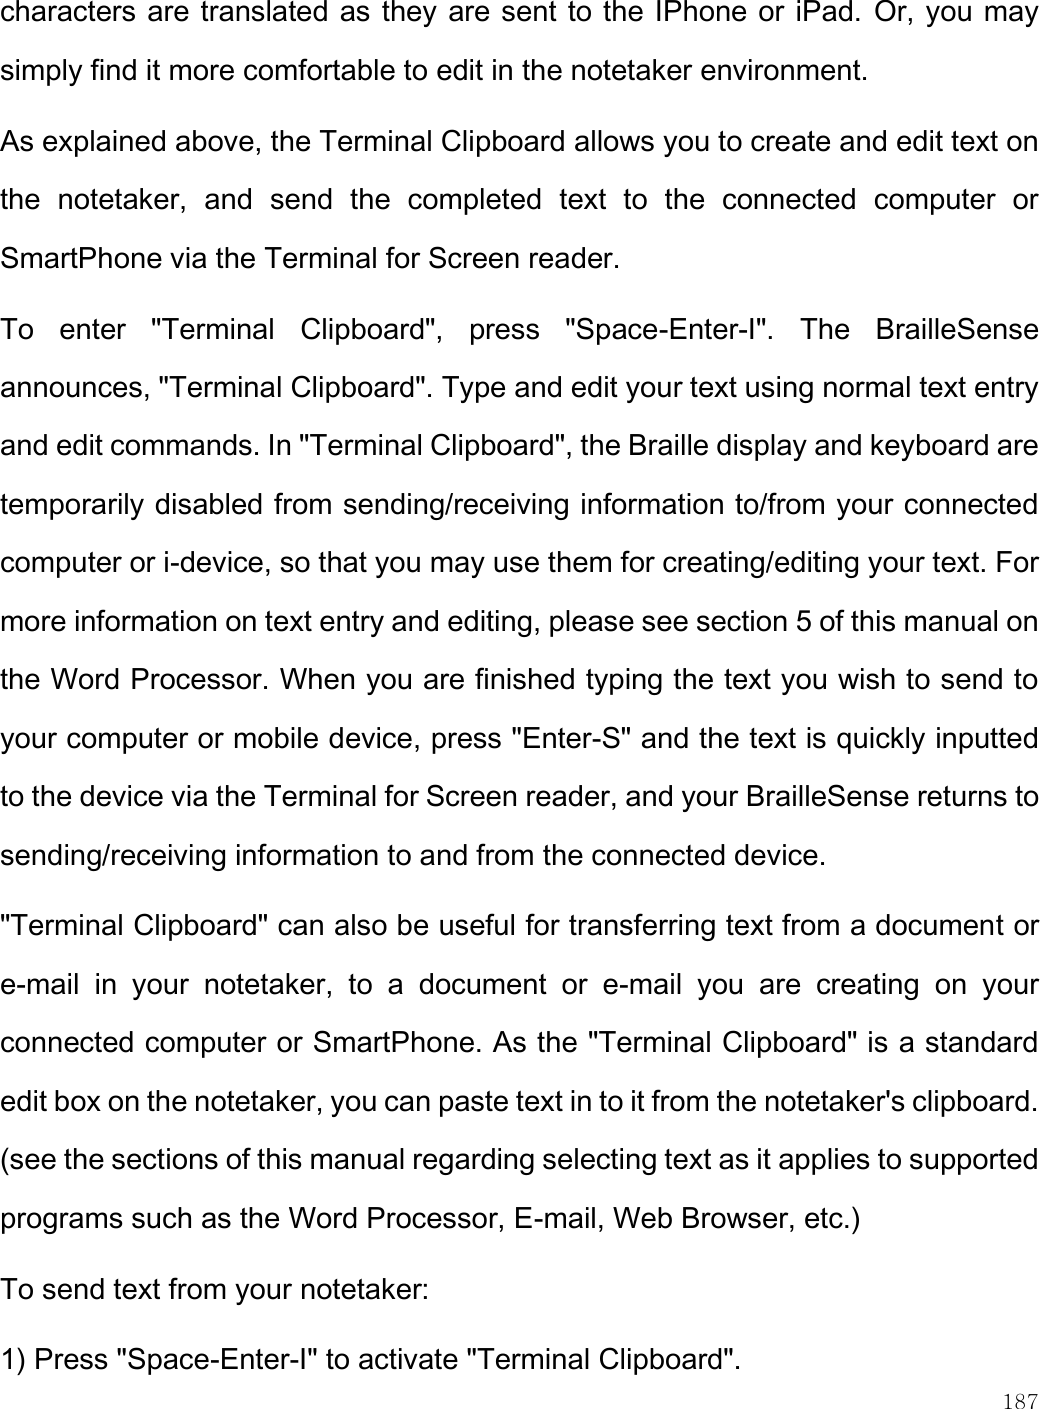    187  characters are translated as they are sent to the IPhone or iPad. Or, you may simply find it more comfortable to edit in the notetaker environment. As explained above, the Terminal Clipboard allows you to create and edit text on the  notetaker,  and  send  the  completed  text  to  the  connected  computer  or SmartPhone via the Terminal for Screen reader. To  enter  &quot;Terminal  Clipboard&quot;,  press  &quot;Space-Enter-I&quot;.  The  BrailleSense announces, &quot;Terminal Clipboard&quot;. Type and edit your text using normal text entry and edit commands. In &quot;Terminal Clipboard&quot;, the Braille display and keyboard are temporarily disabled from sending/receiving information to/from your connected computer or i-device, so that you may use them for creating/editing your text. For more information on text entry and editing, please see section 5 of this manual on the Word Processor. When you are finished typing the text you wish to send to your computer or mobile device, press &quot;Enter-S&quot; and the text is quickly inputted to the device via the Terminal for Screen reader, and your BrailleSense returns to sending/receiving information to and from the connected device. &quot;Terminal Clipboard&quot; can also be useful for transferring text from a document or e-mail  in  your  notetaker,  to  a  document  or  e-mail  you  are  creating  on  your connected computer or SmartPhone. As the &quot;Terminal Clipboard&quot; is a standard edit box on the notetaker, you can paste text in to it from the notetaker&apos;s clipboard. (see the sections of this manual regarding selecting text as it applies to supported programs such as the Word Processor, E-mail, Web Browser, etc.) To send text from your notetaker:  1) Press &quot;Space-Enter-I&quot; to activate &quot;Terminal Clipboard&quot;. 